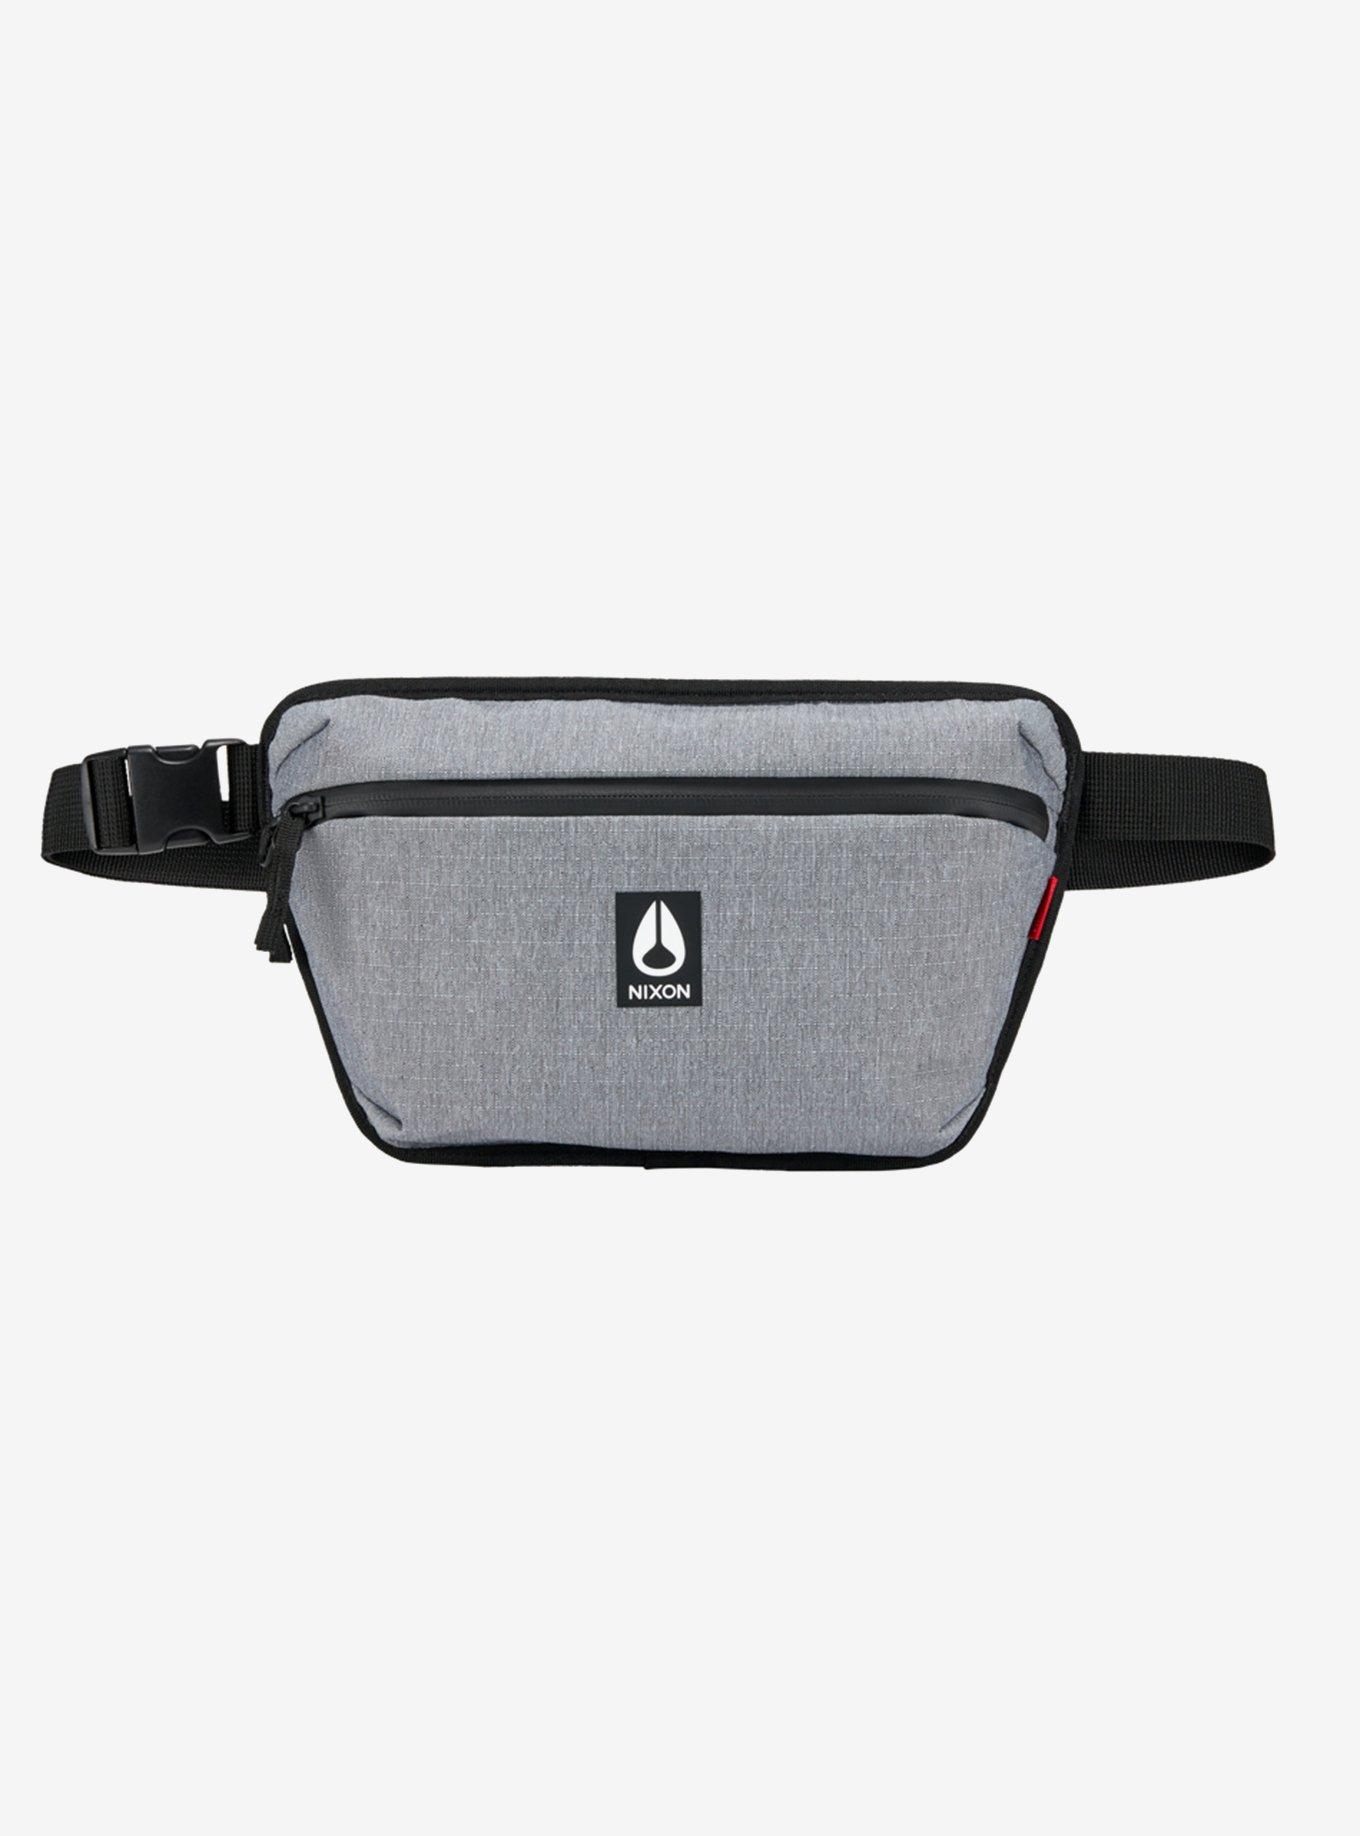 Nixon Day Trippin' Sling Heather Gray Fanny Pack, , hi-res